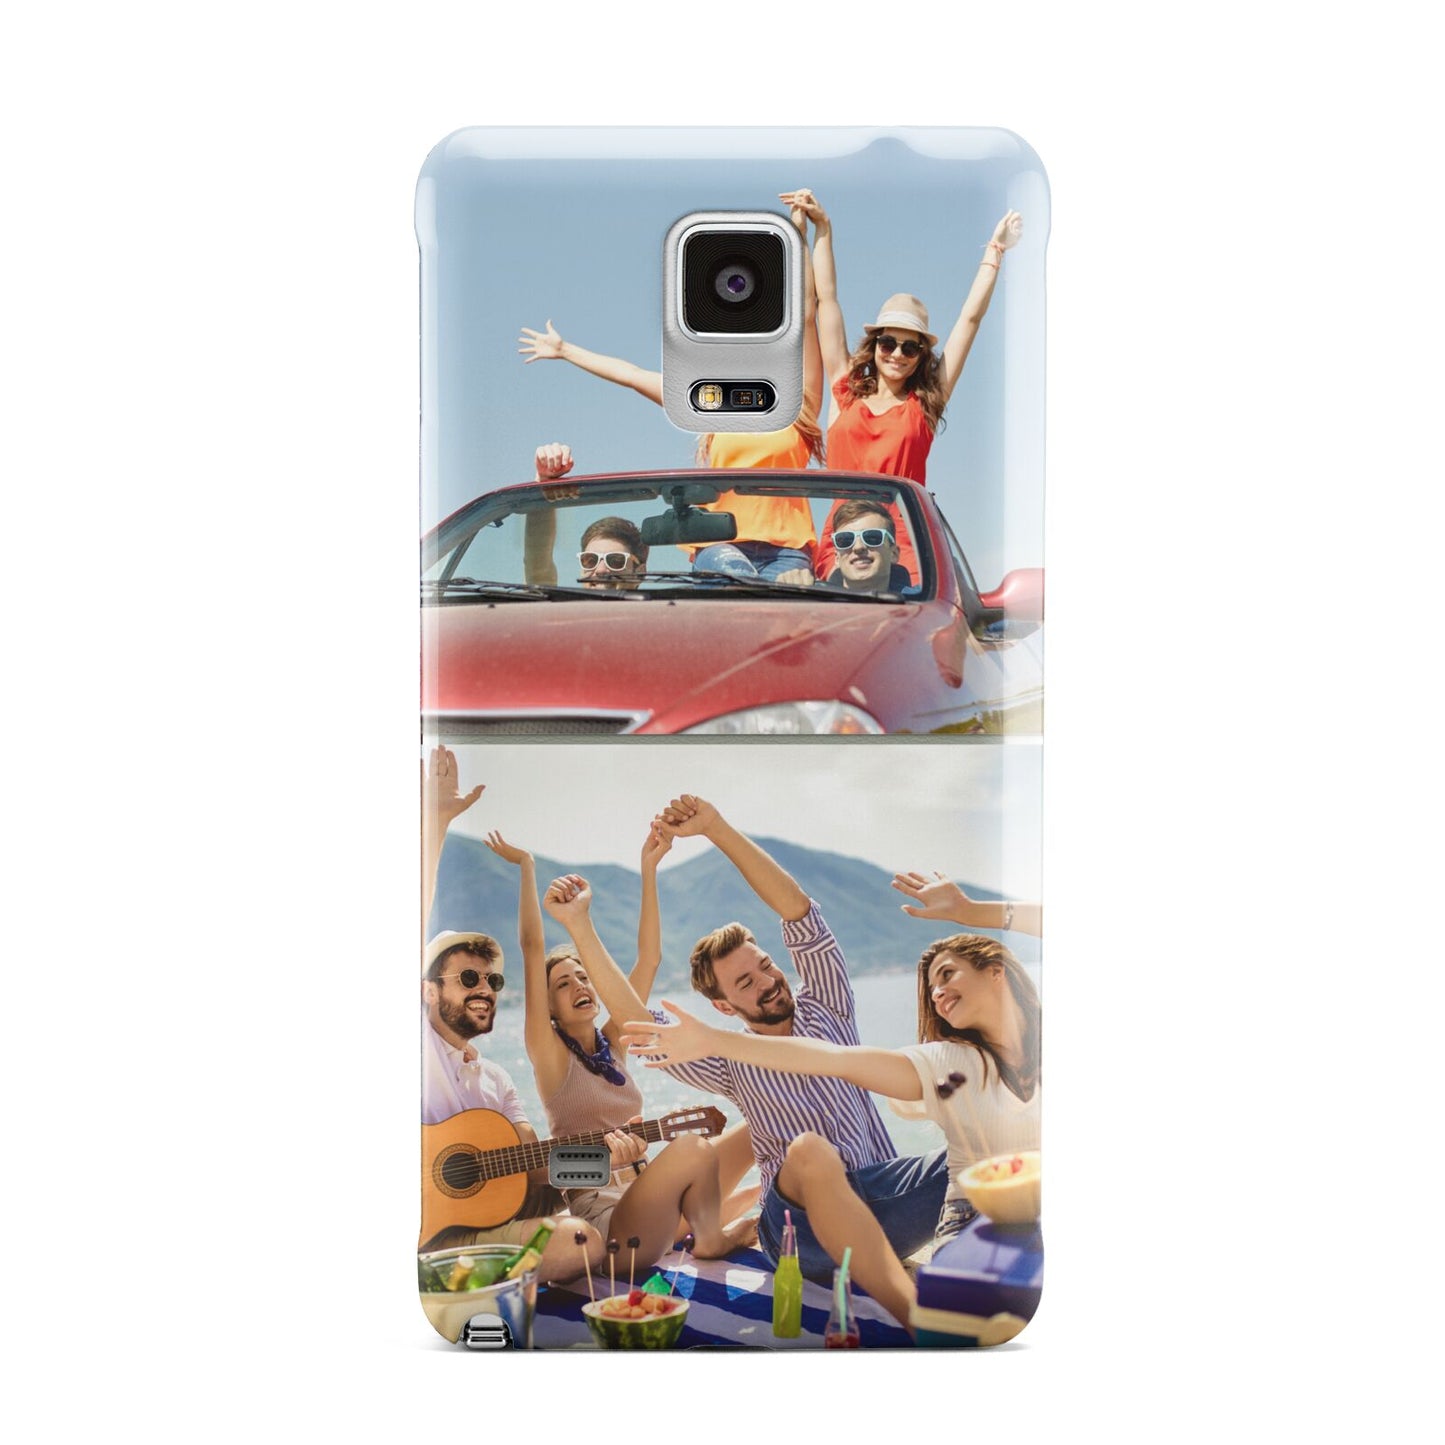 Two Photo Samsung Galaxy Note 4 Case